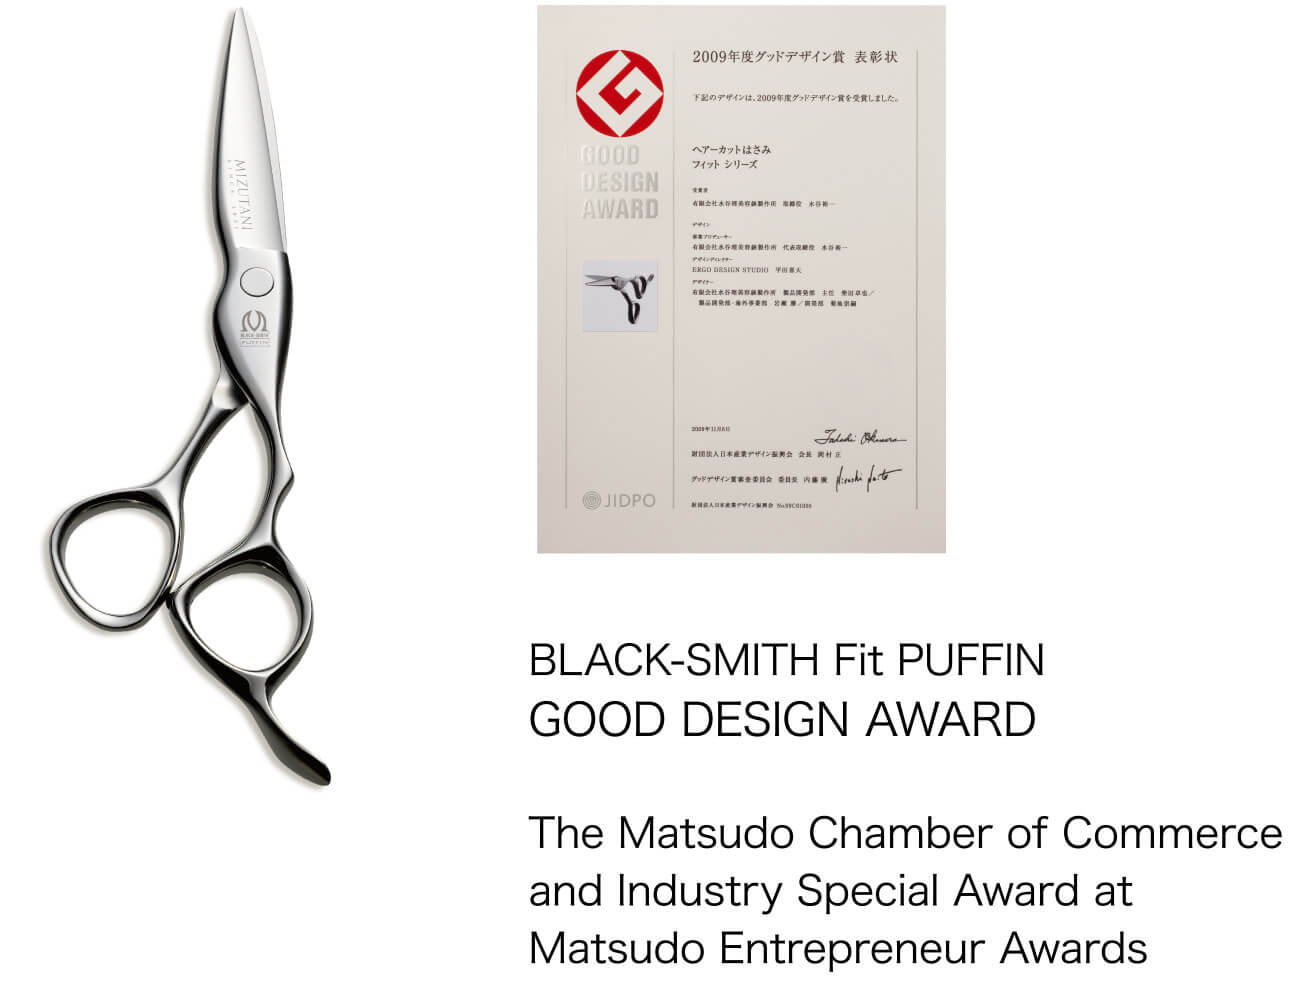 BLACK-SMITH Fit PUFFIN GOOD DESIGN AWARD / The Matsudo Chamber of Commerce and Industry Special Award at Matsudo Entrepreneur Awards